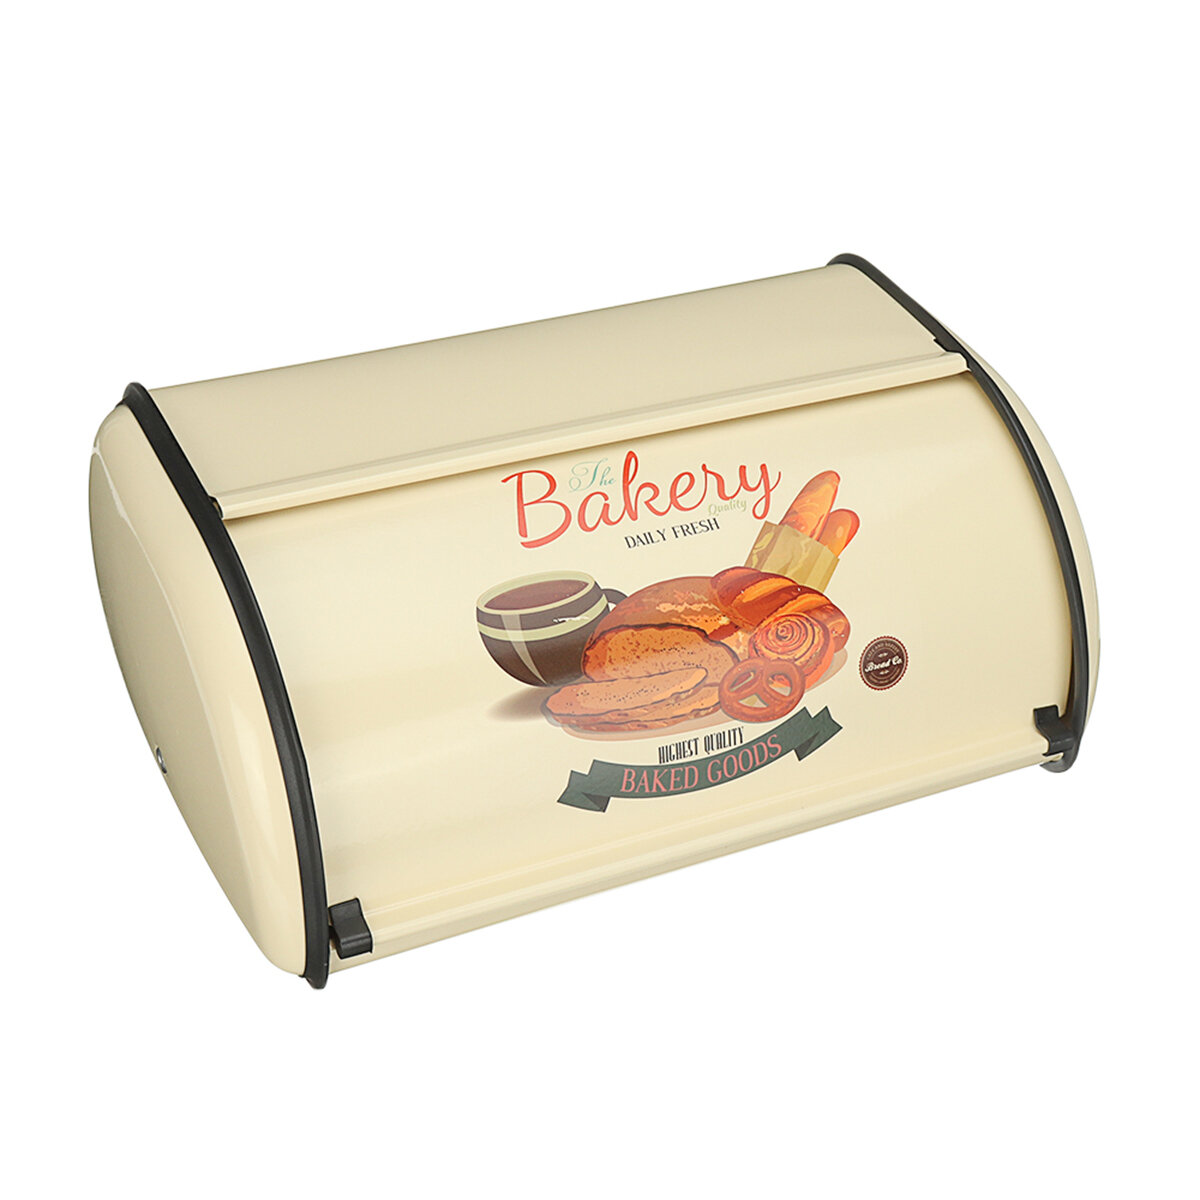 

Metal Bread Box/Bin/kitchen Storage Containers with Roll Top Lid Desktop Off-Surface Shelves 32x20x14cm